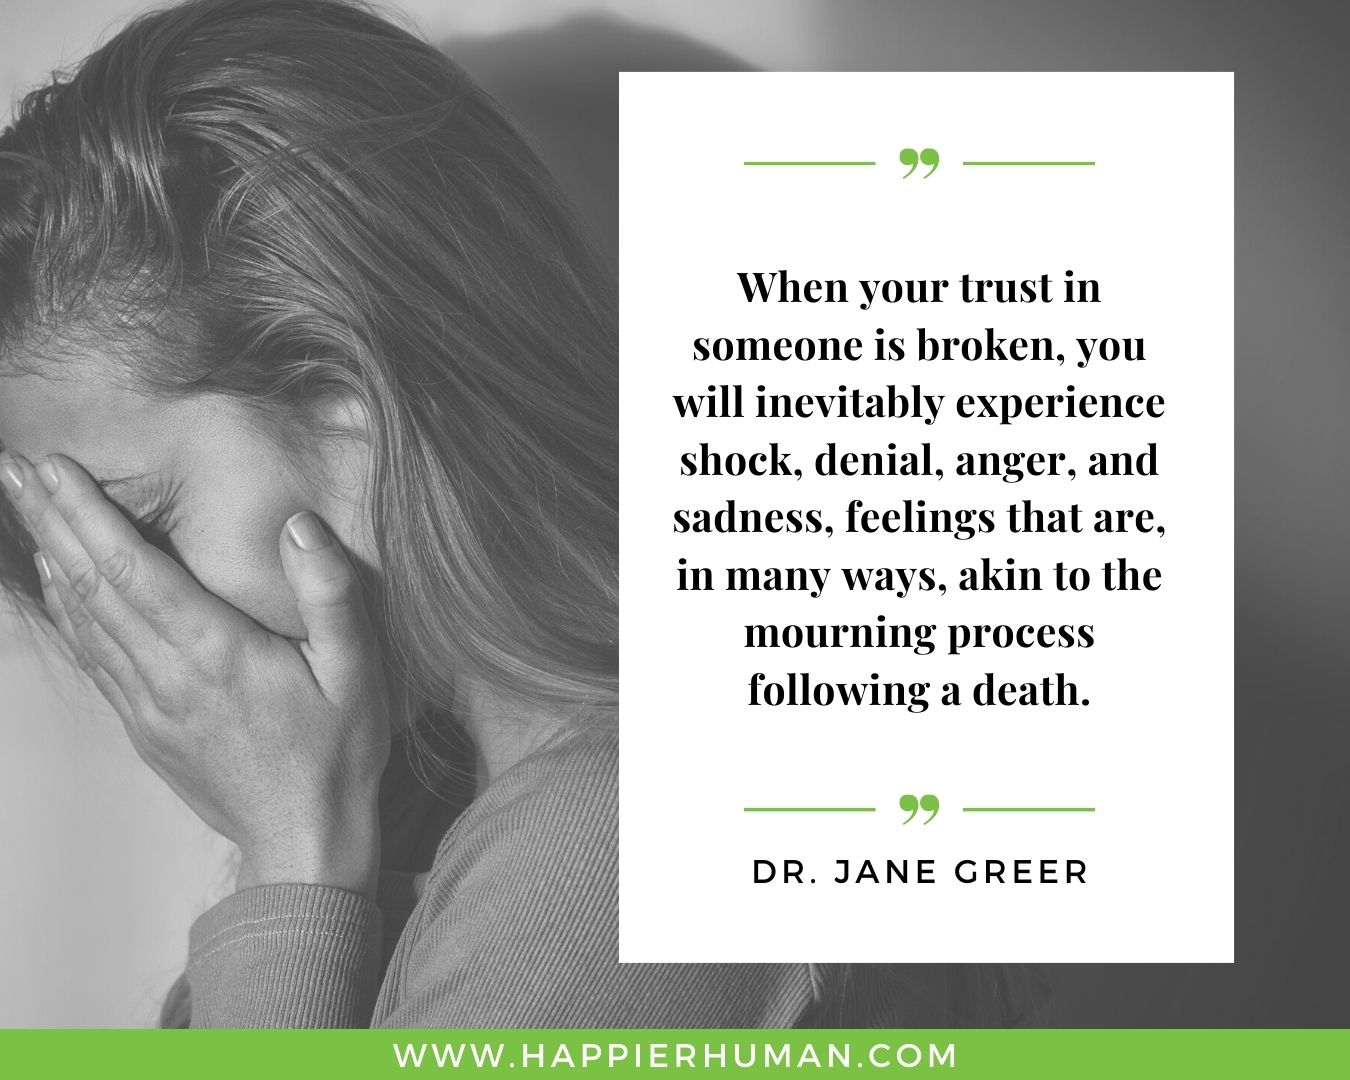 Broken Trust Quotes - “When your trust in someone is broken, you will inevitably experience shock, denial, anger, and sadness, feelings that are, in many ways, akin to the mourning process following a death.” - Dr. Jane Greer